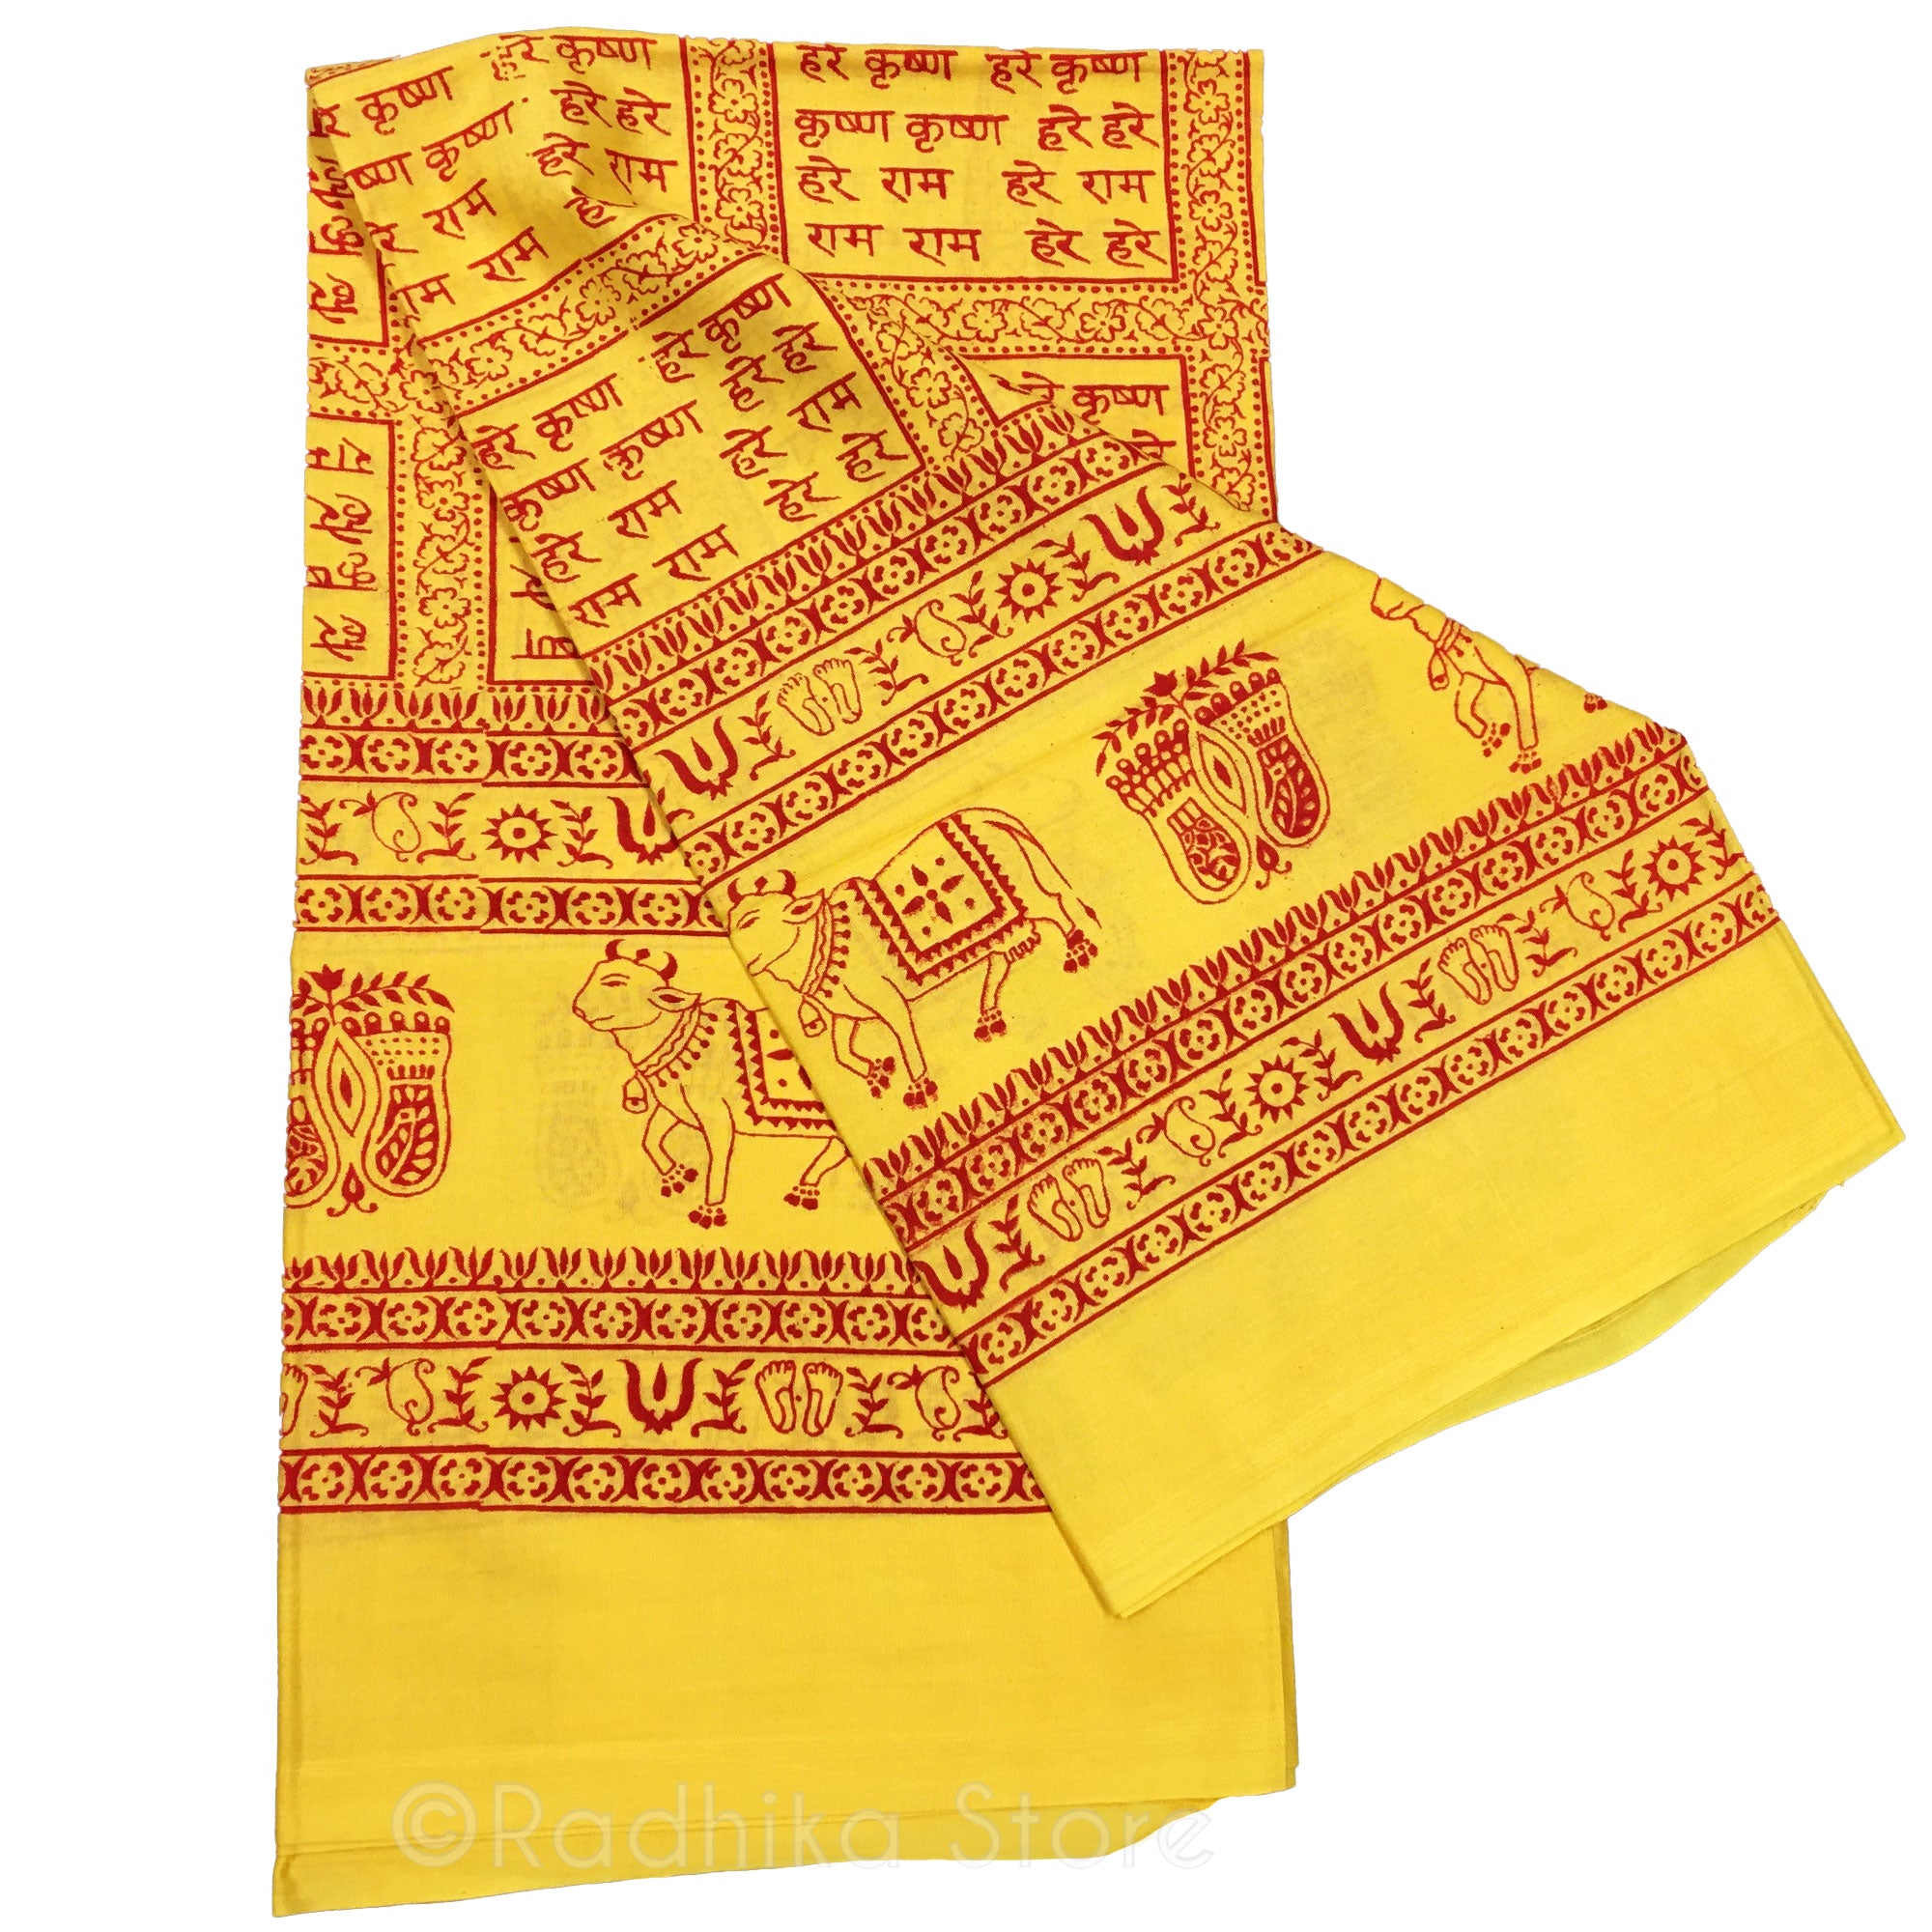 Maha Mantra Chadar With Vrindavan Cows and Lotus Feet -  Sunshine Yellow With Red